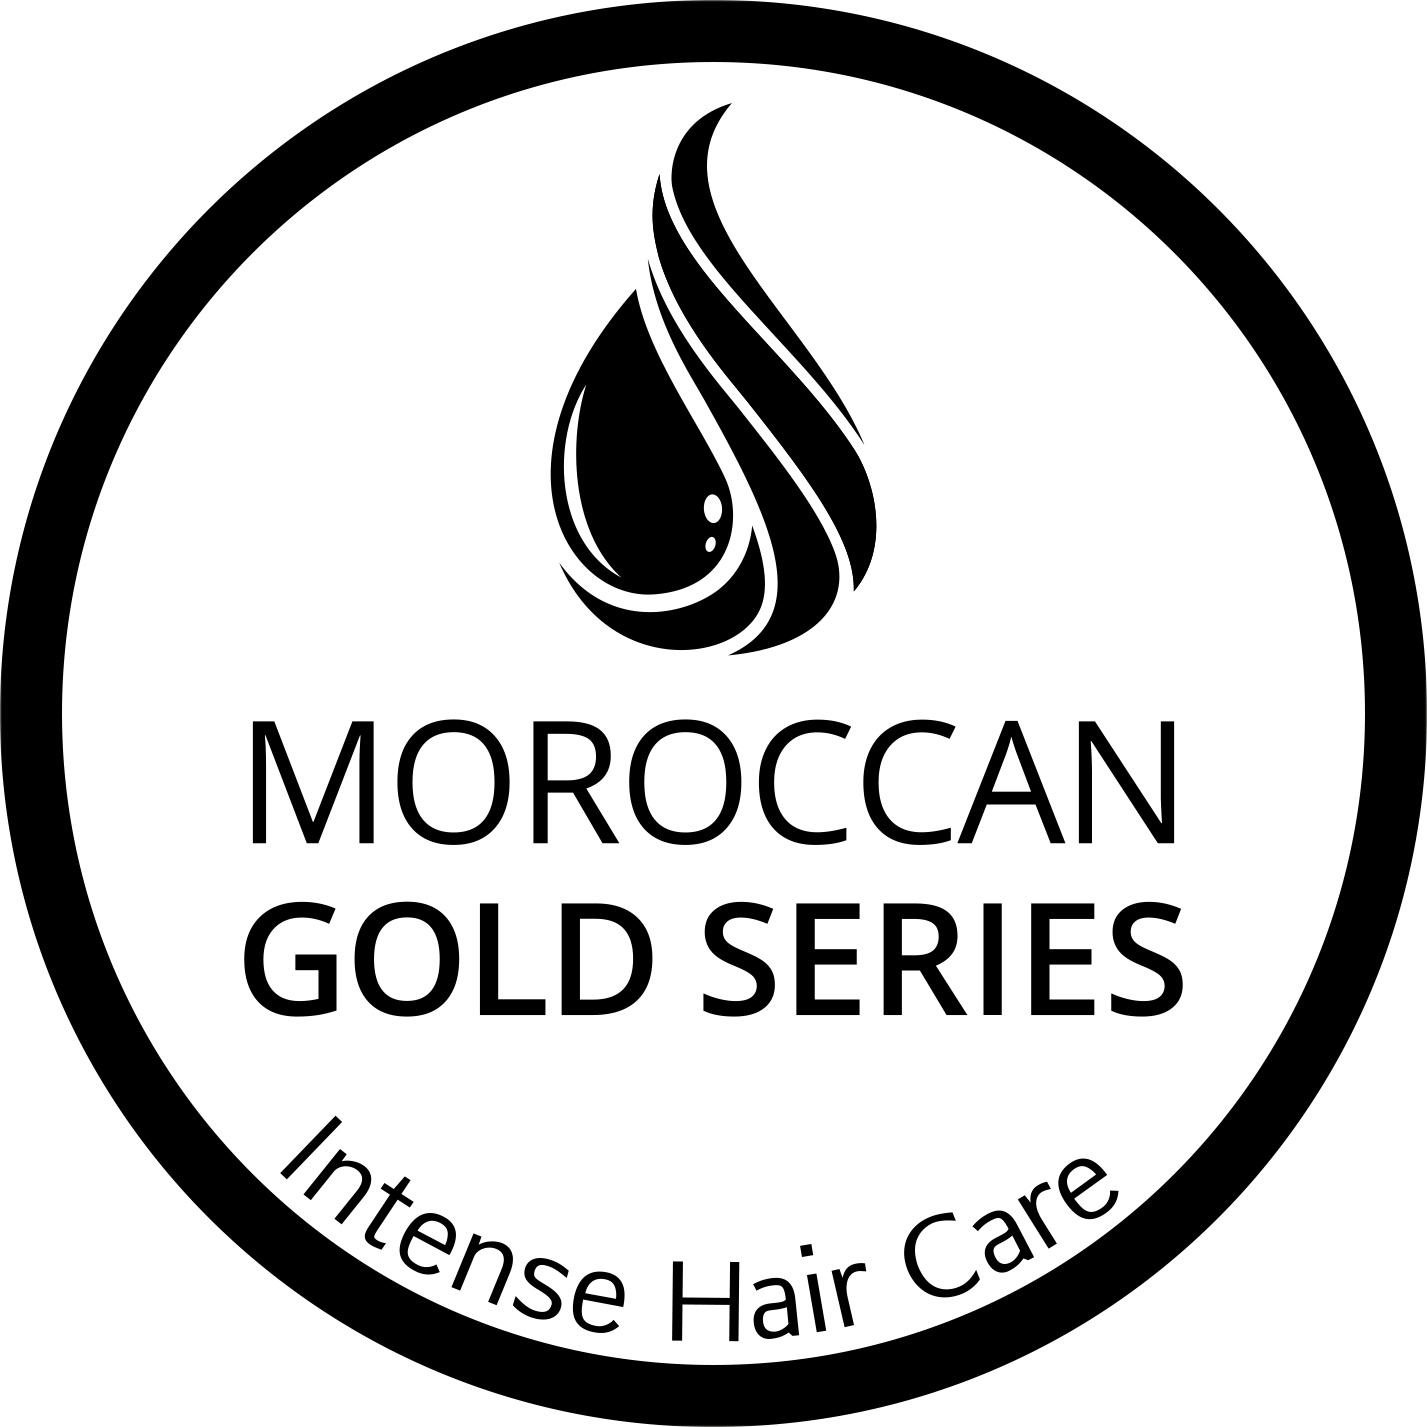 Moroccan Gold Series